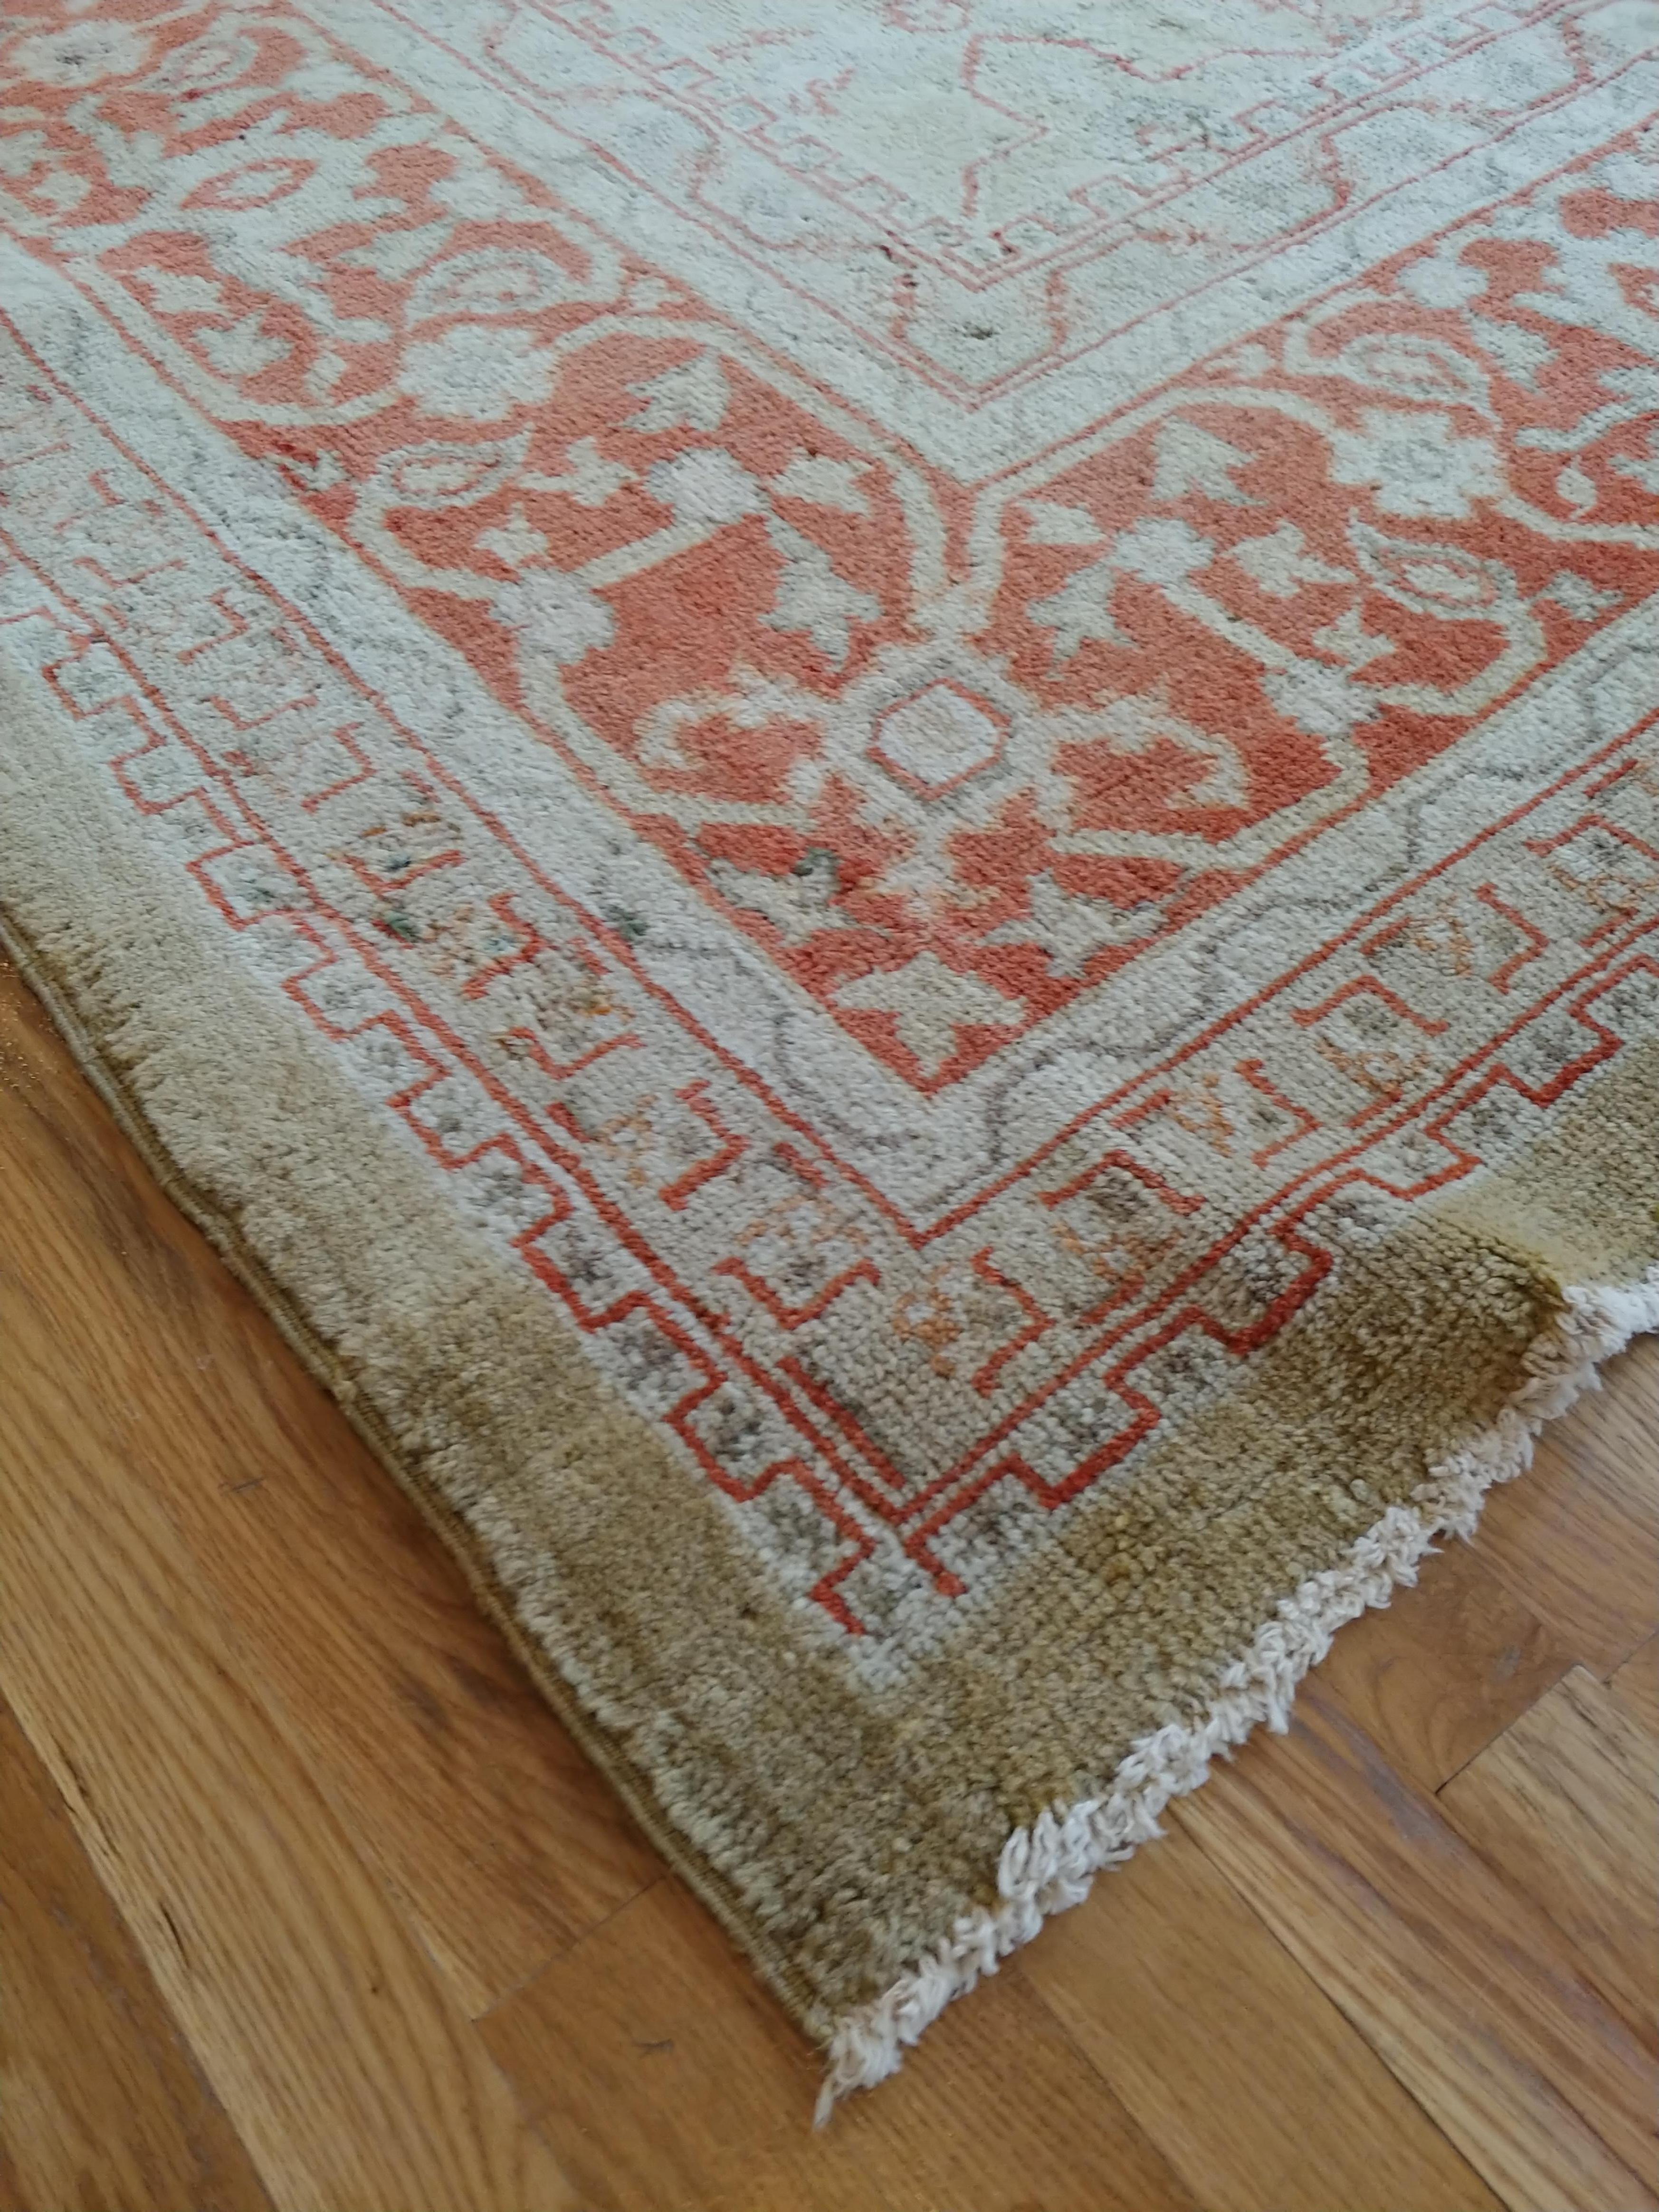 Antique Oushak Carpet Handmade Oriental Rug, Pale Green Coral, Taupe, Cream Fine In Good Condition For Sale In Port Washington, NY